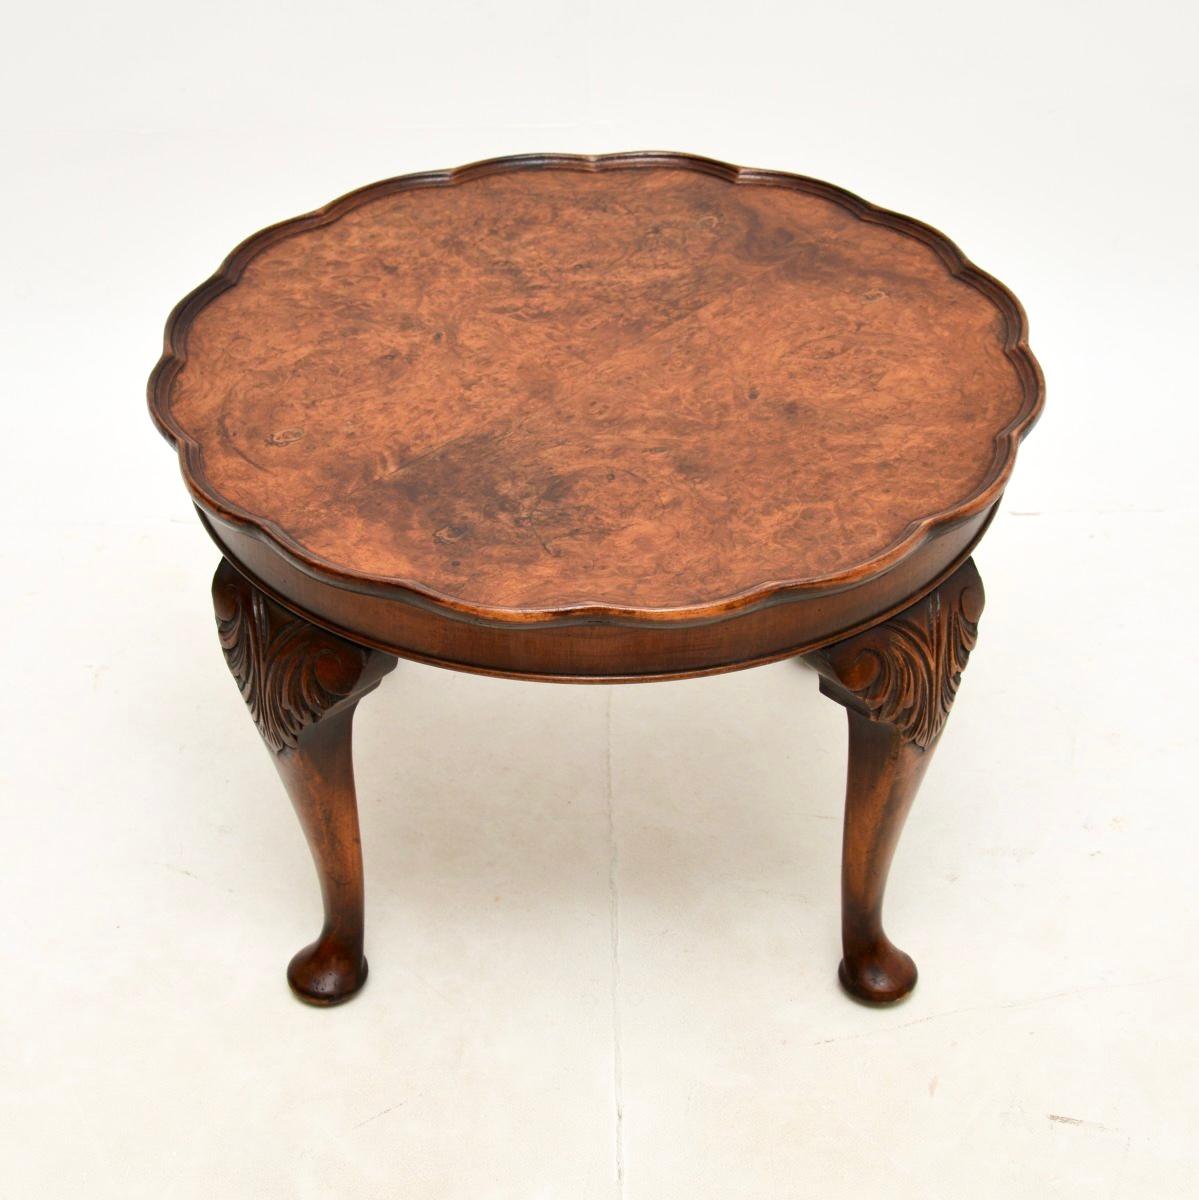 A lovely antique burr walnut pie crust coffee table. This was made in England, it dates from the 1920-30’s.

It is of very good quality and is a very useful size. The top has stunning burr walnut grain patterns, this sits on sturdy and shapely